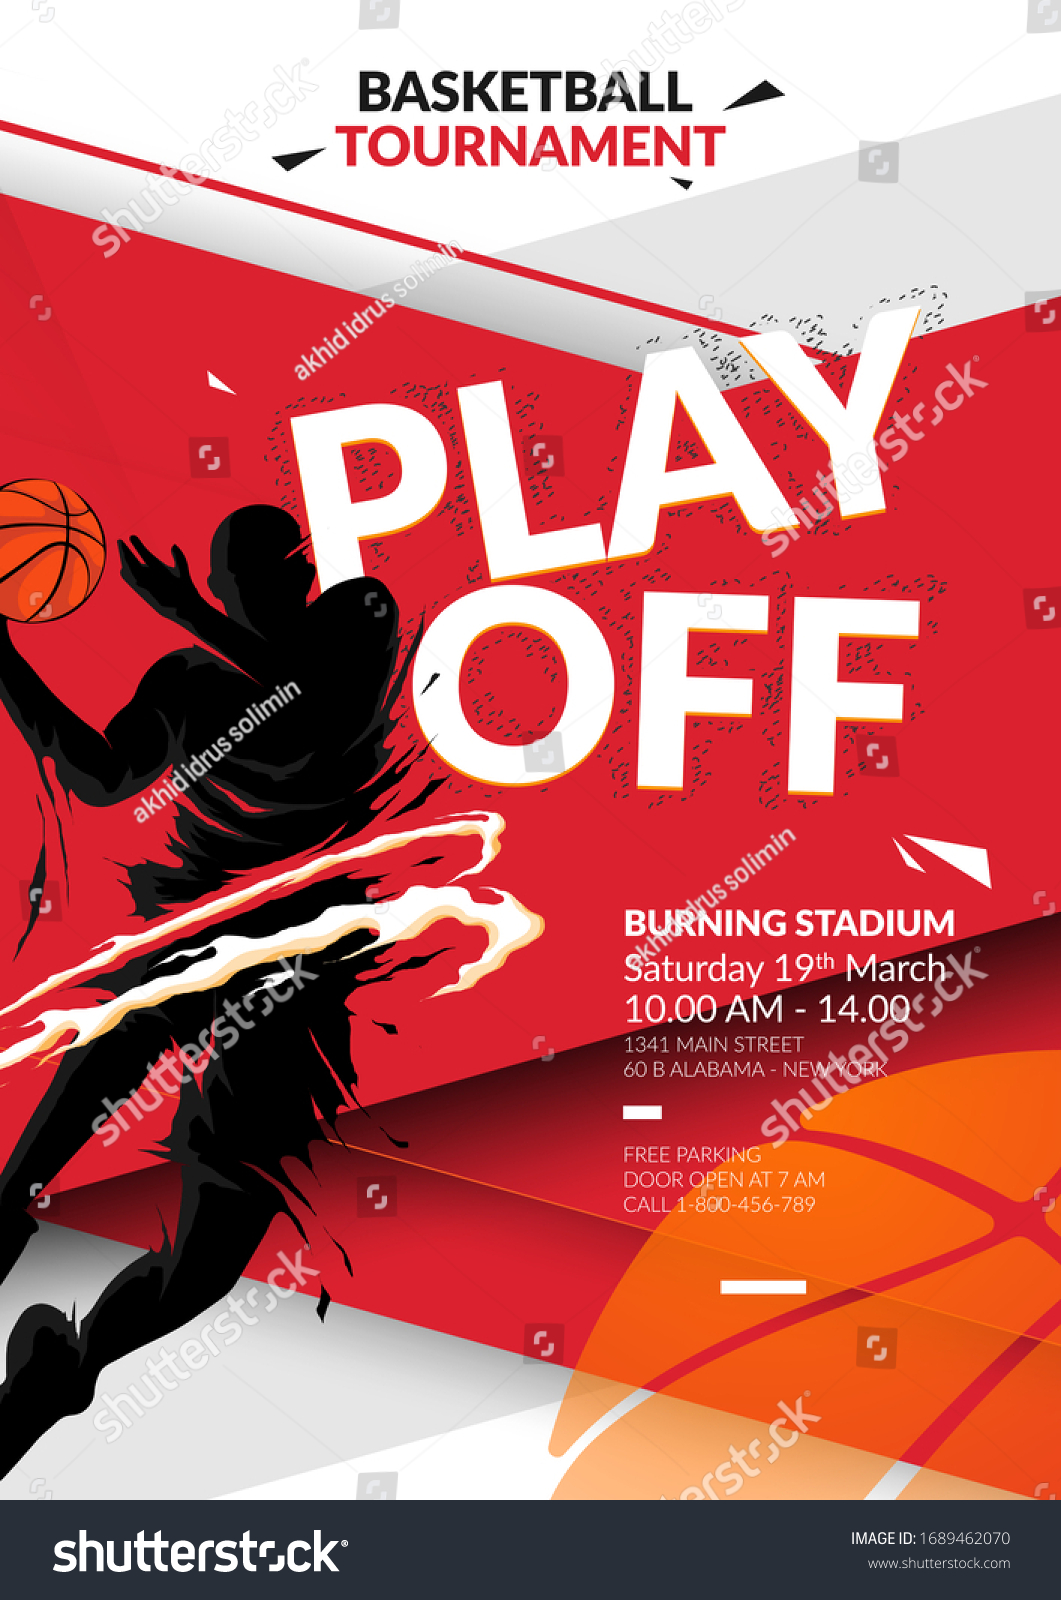 Free Basketball Tournament Flyer Template from image.shutterstock.com